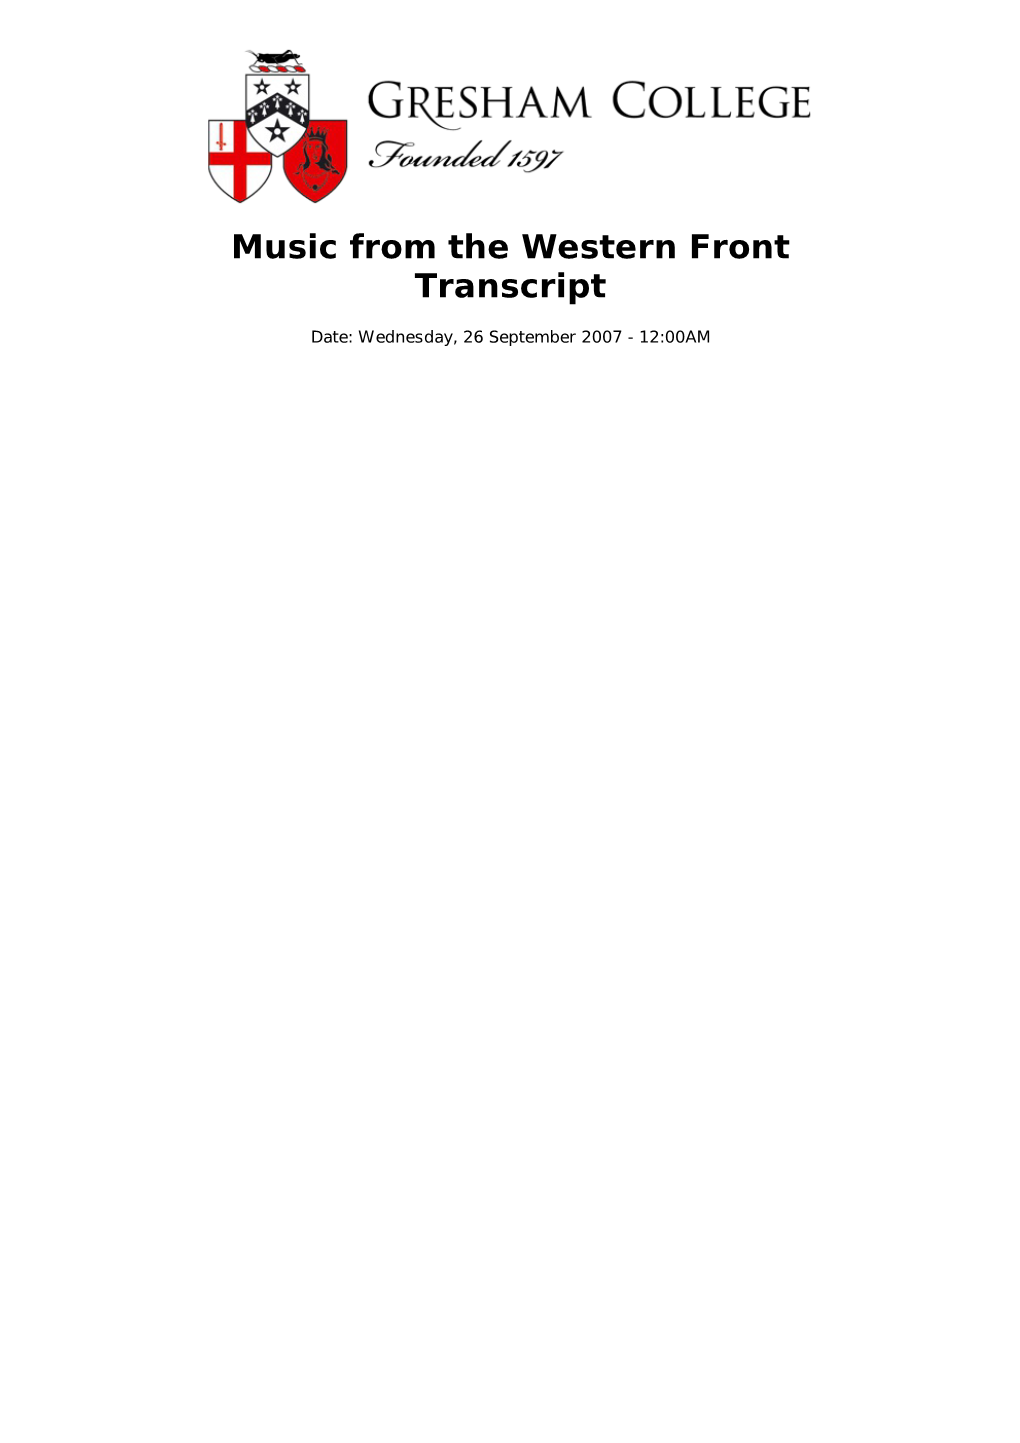 Music from the Western Front Transcript